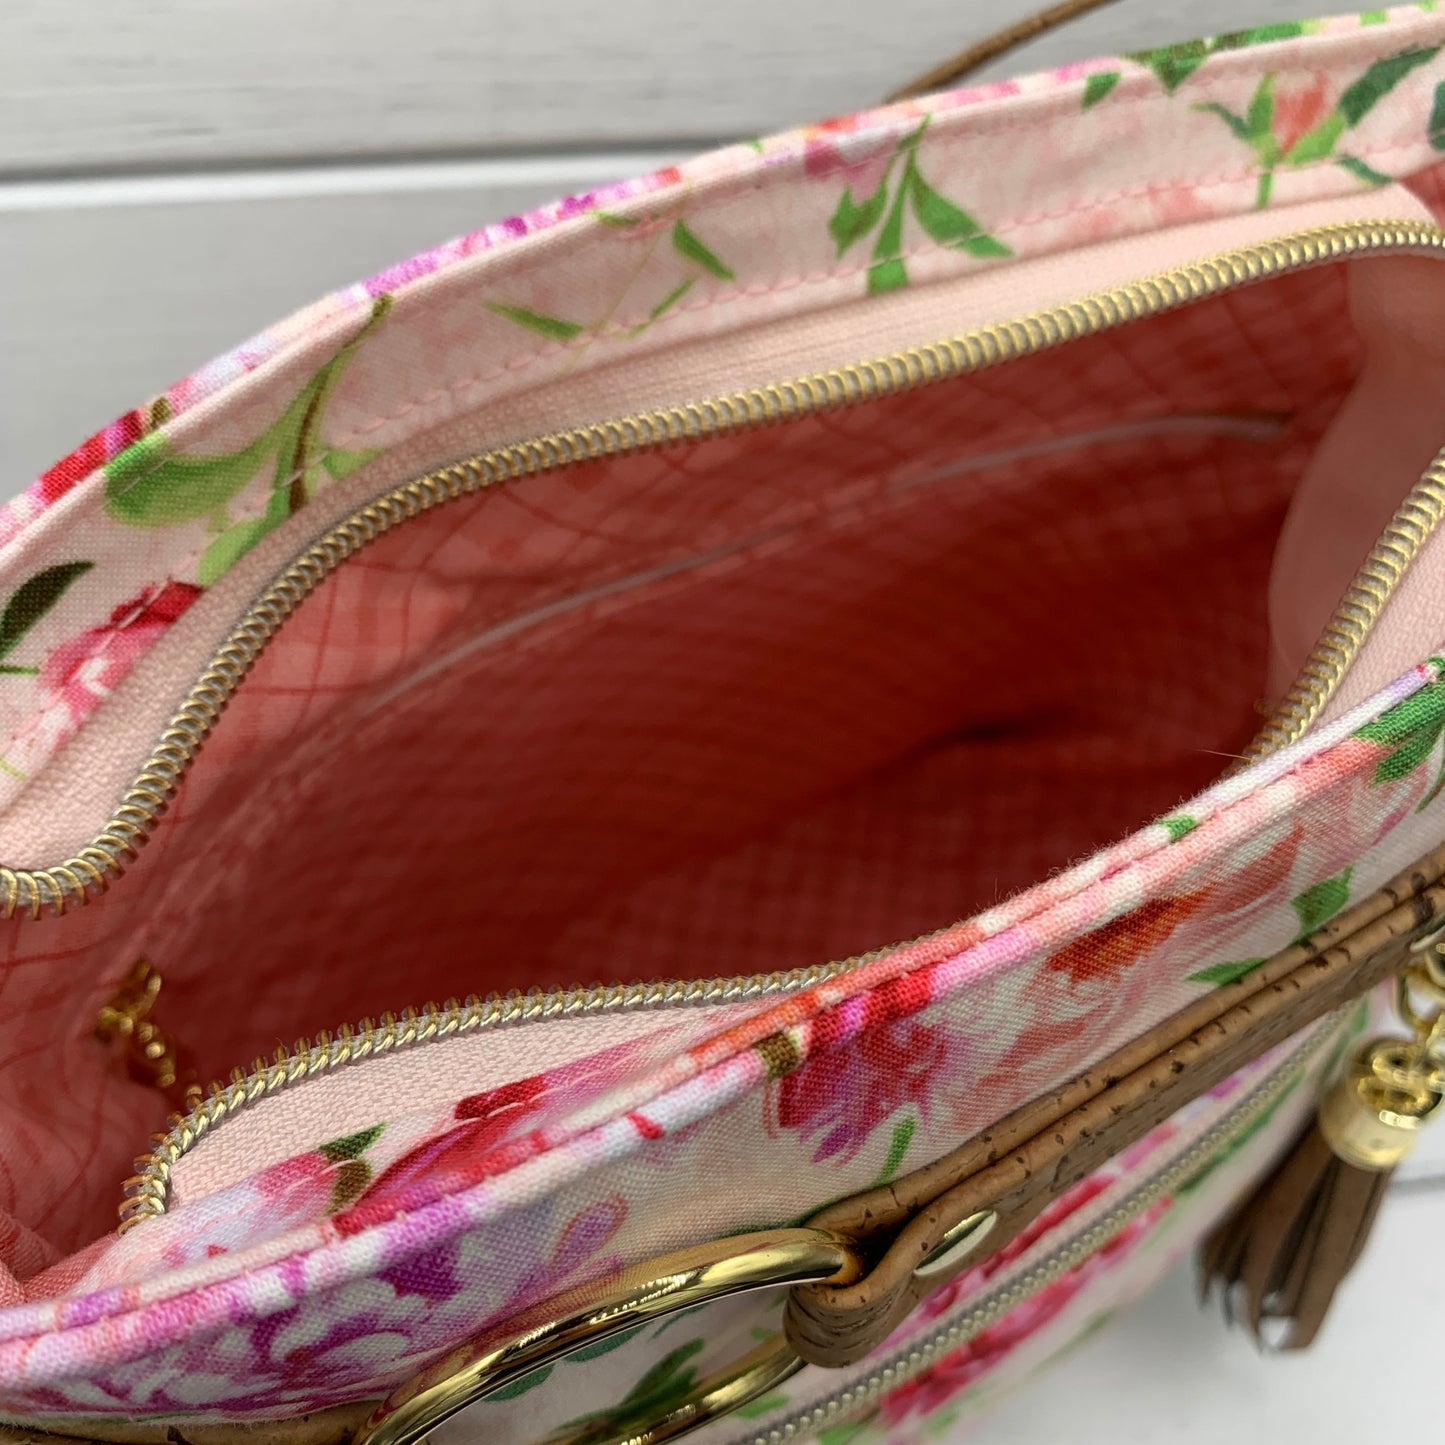 Momexa Crossbody Bag - Pink Floral Cotton and Brown Cork